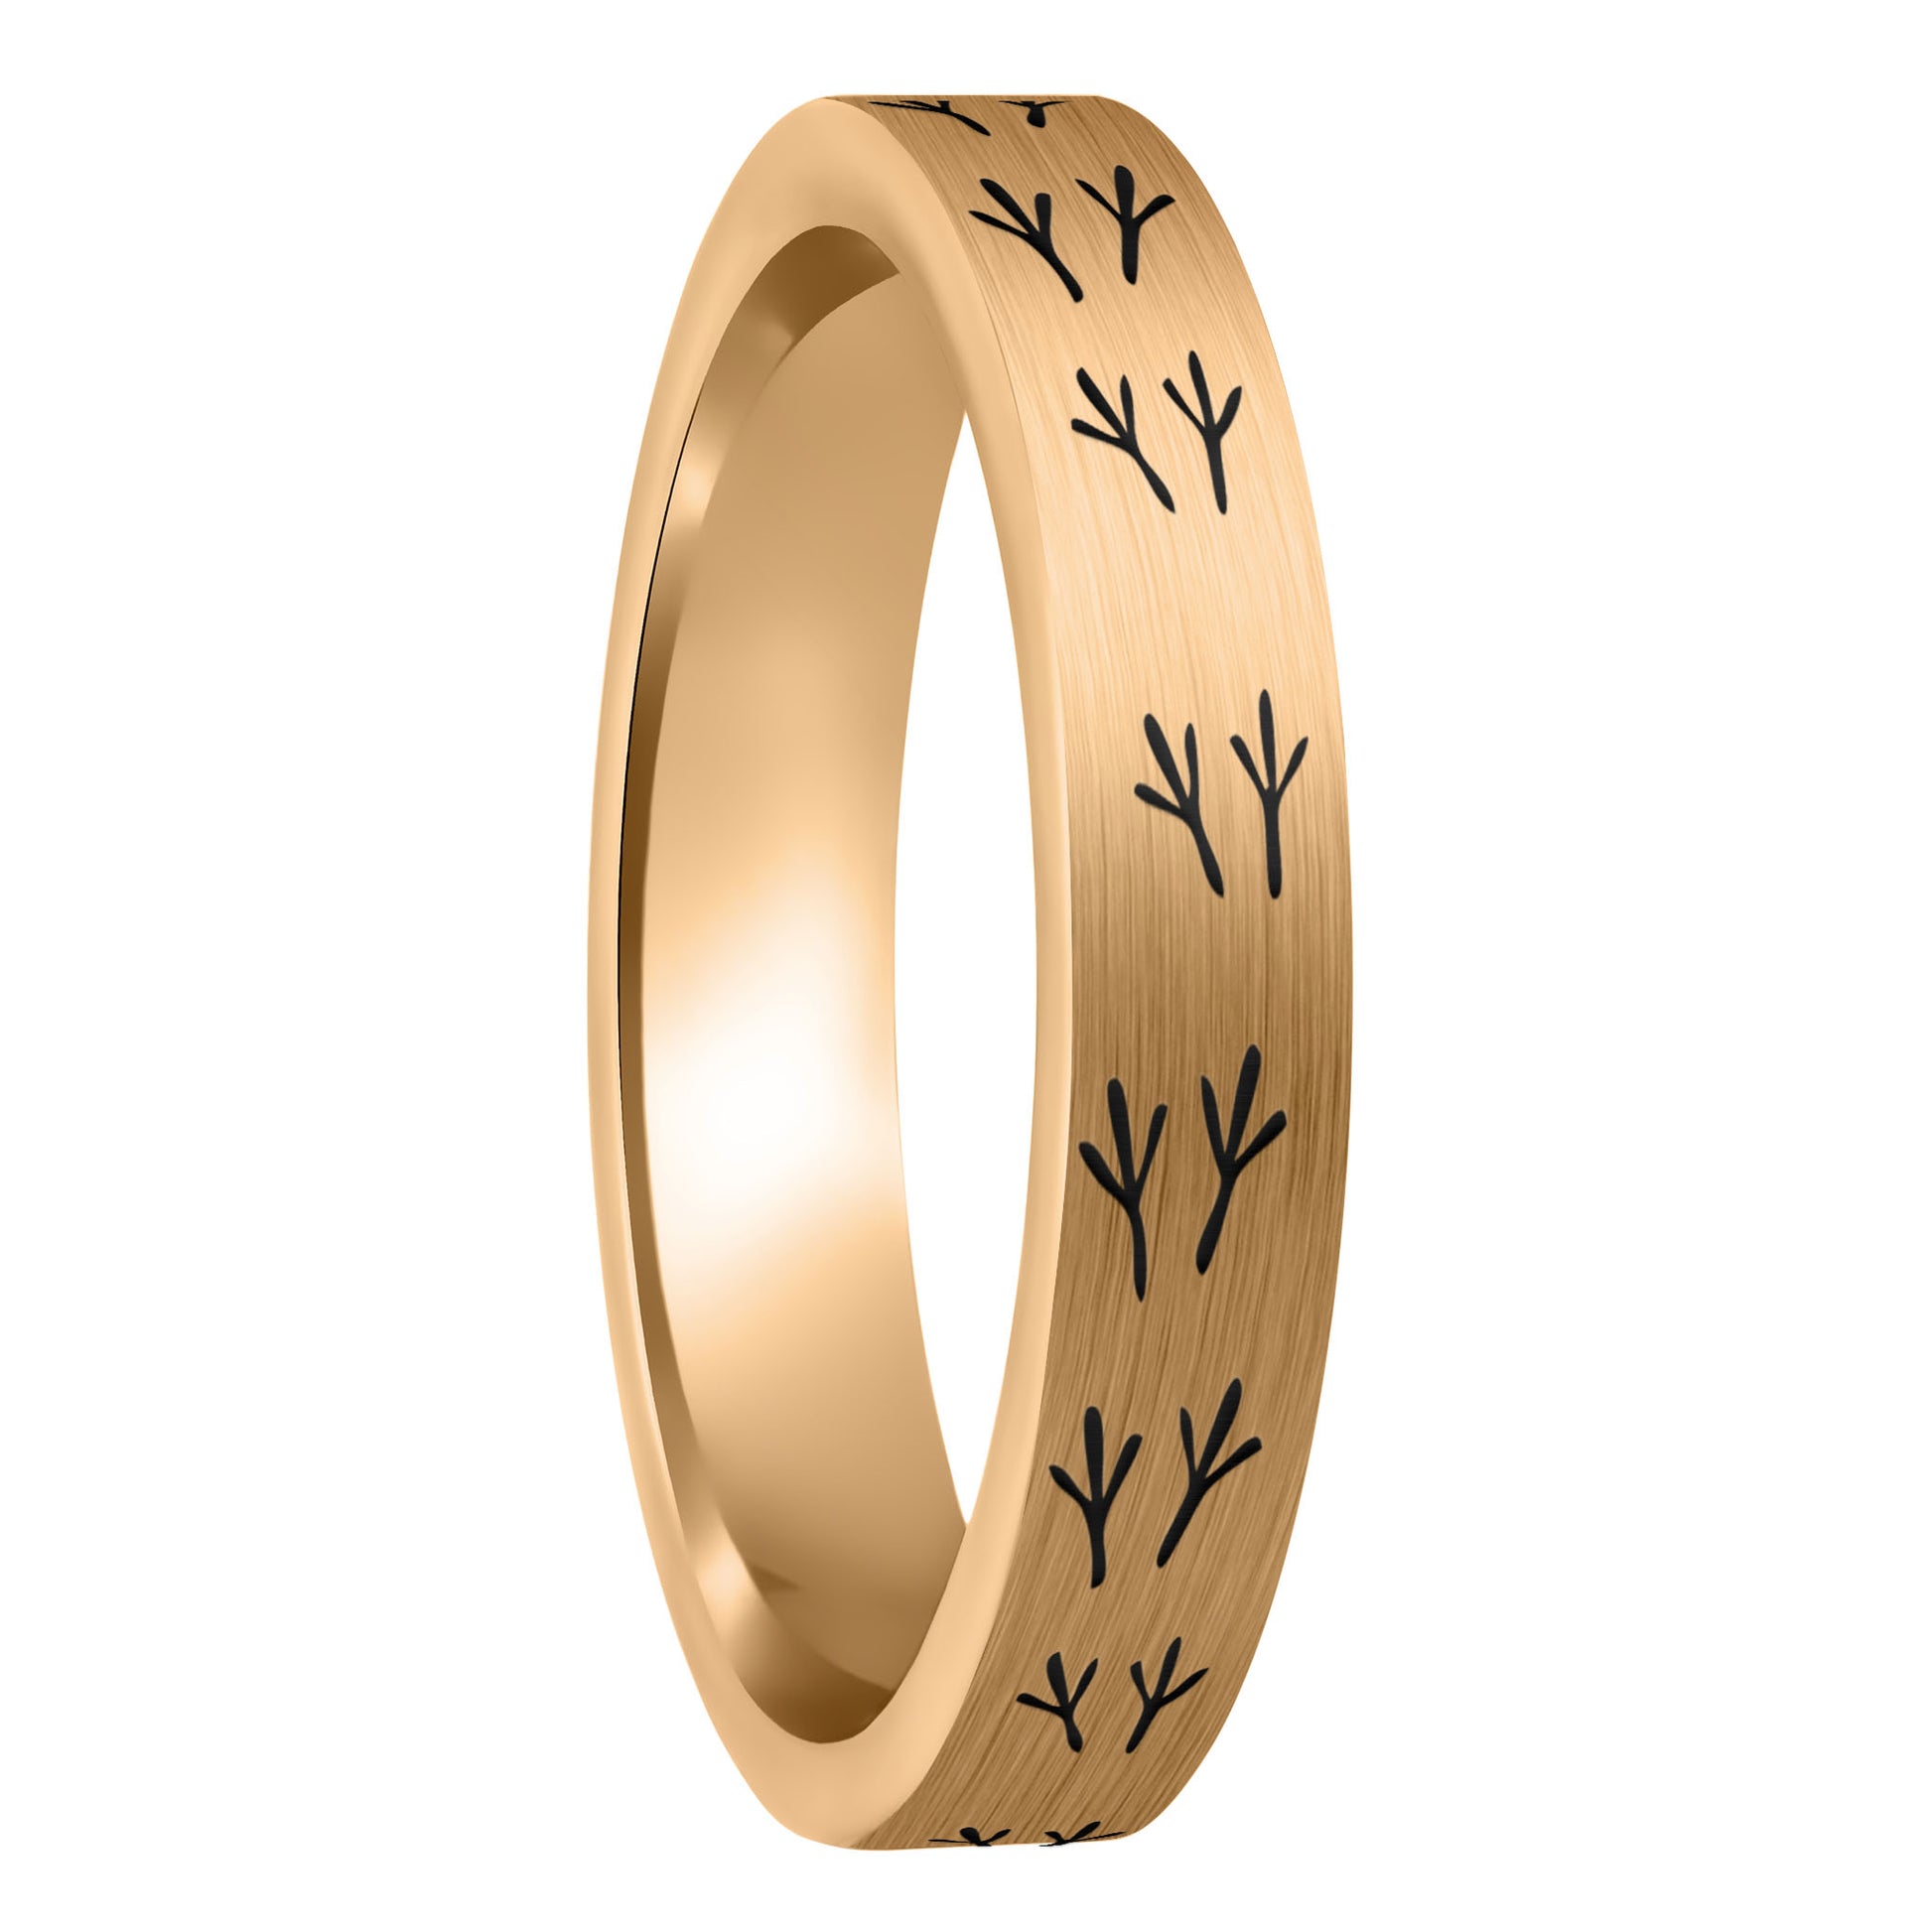 A bird tracks brushed rose gold tungsten women's wedding band displayed on a plain white background.